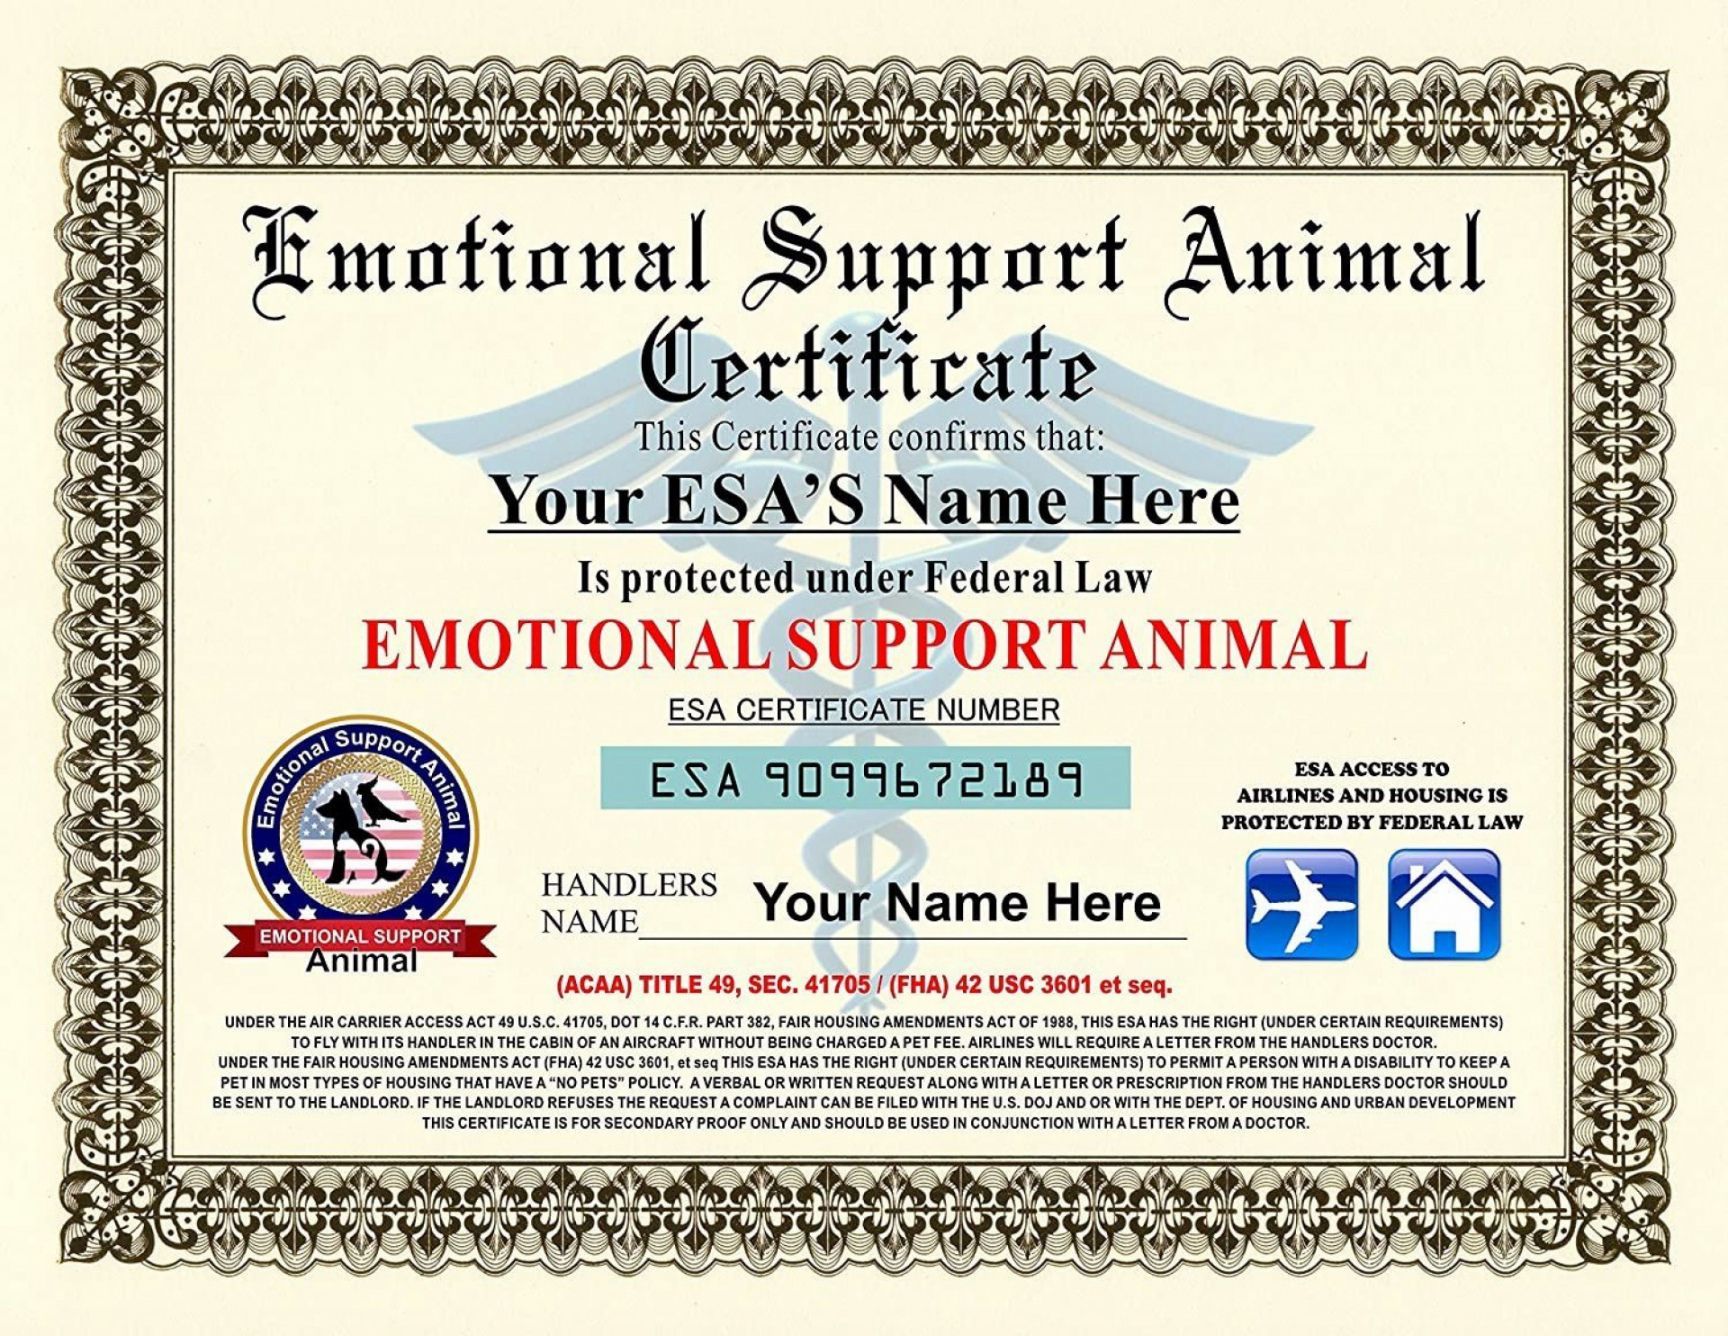 Get Our Sample of Emotional Support Animal Certificate ...